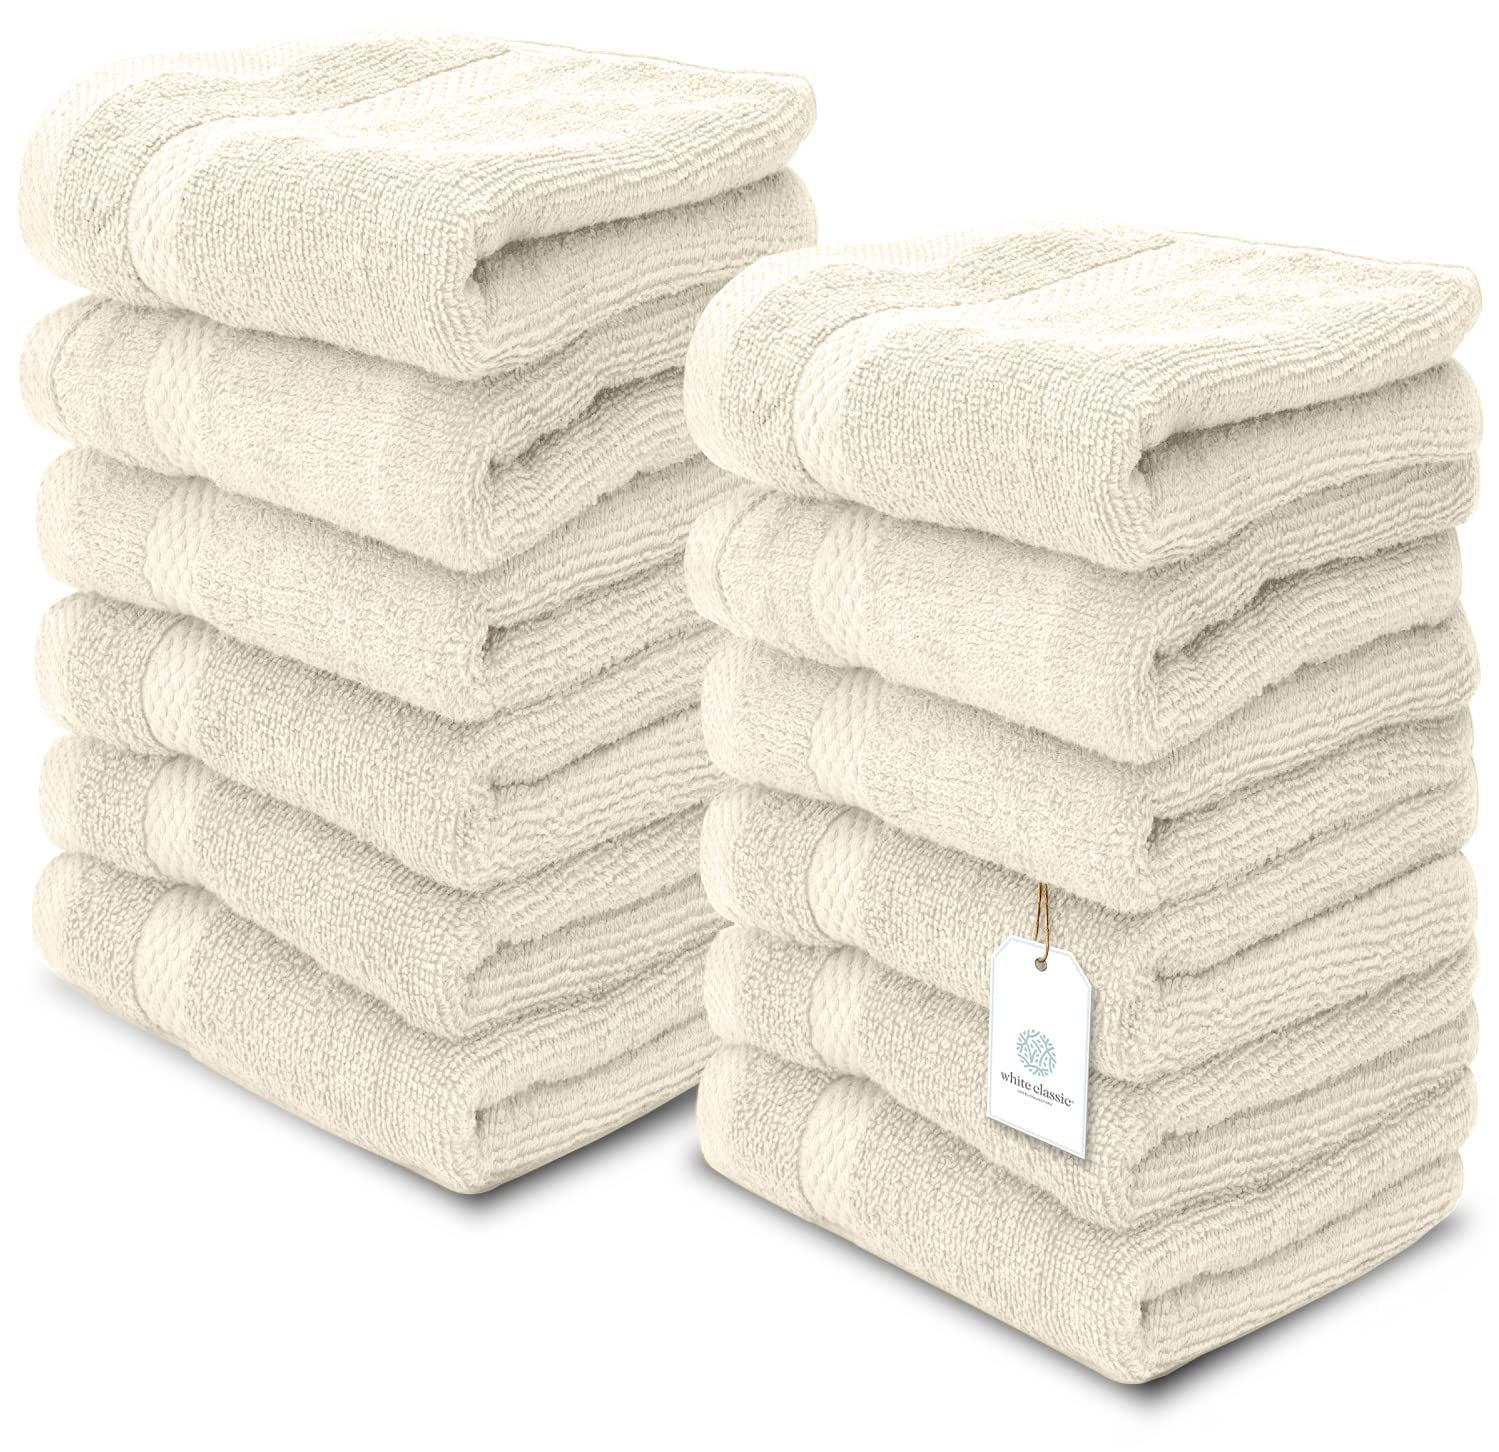 Luxury Hotel Towels Soft Highly Absorbent Large Bath Towel Hand Washcloth  Towel